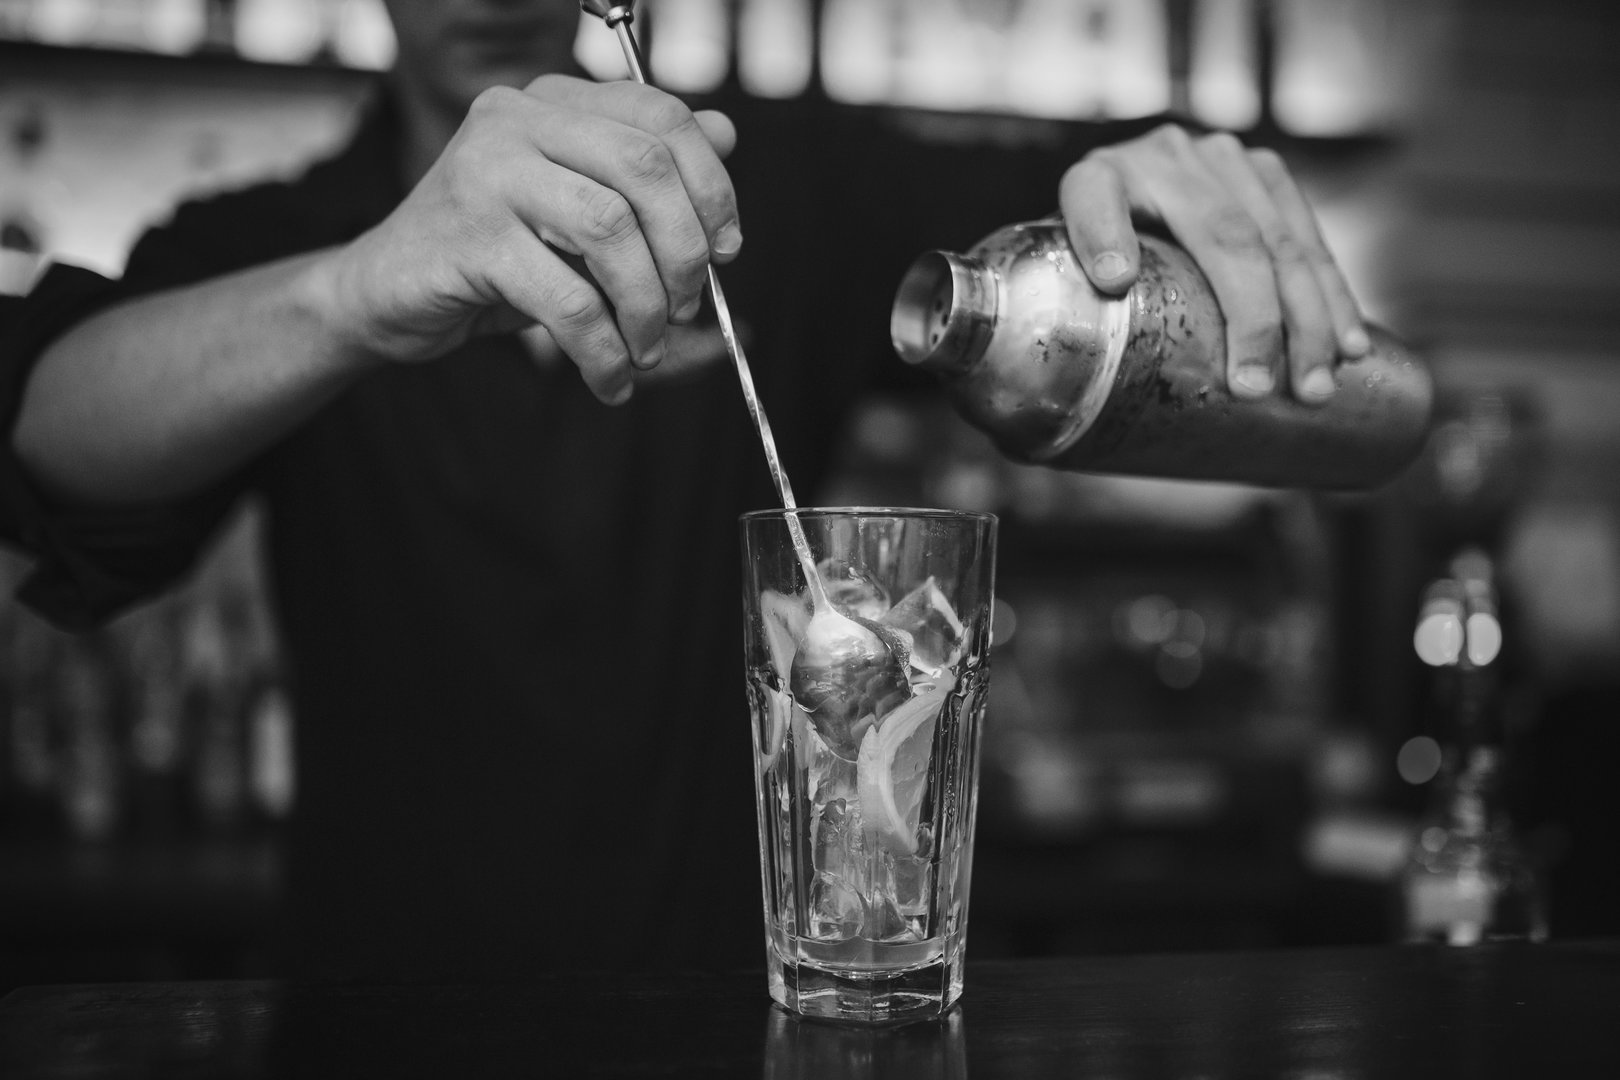 46% of respondents found difficulties in recruiting bar staff.